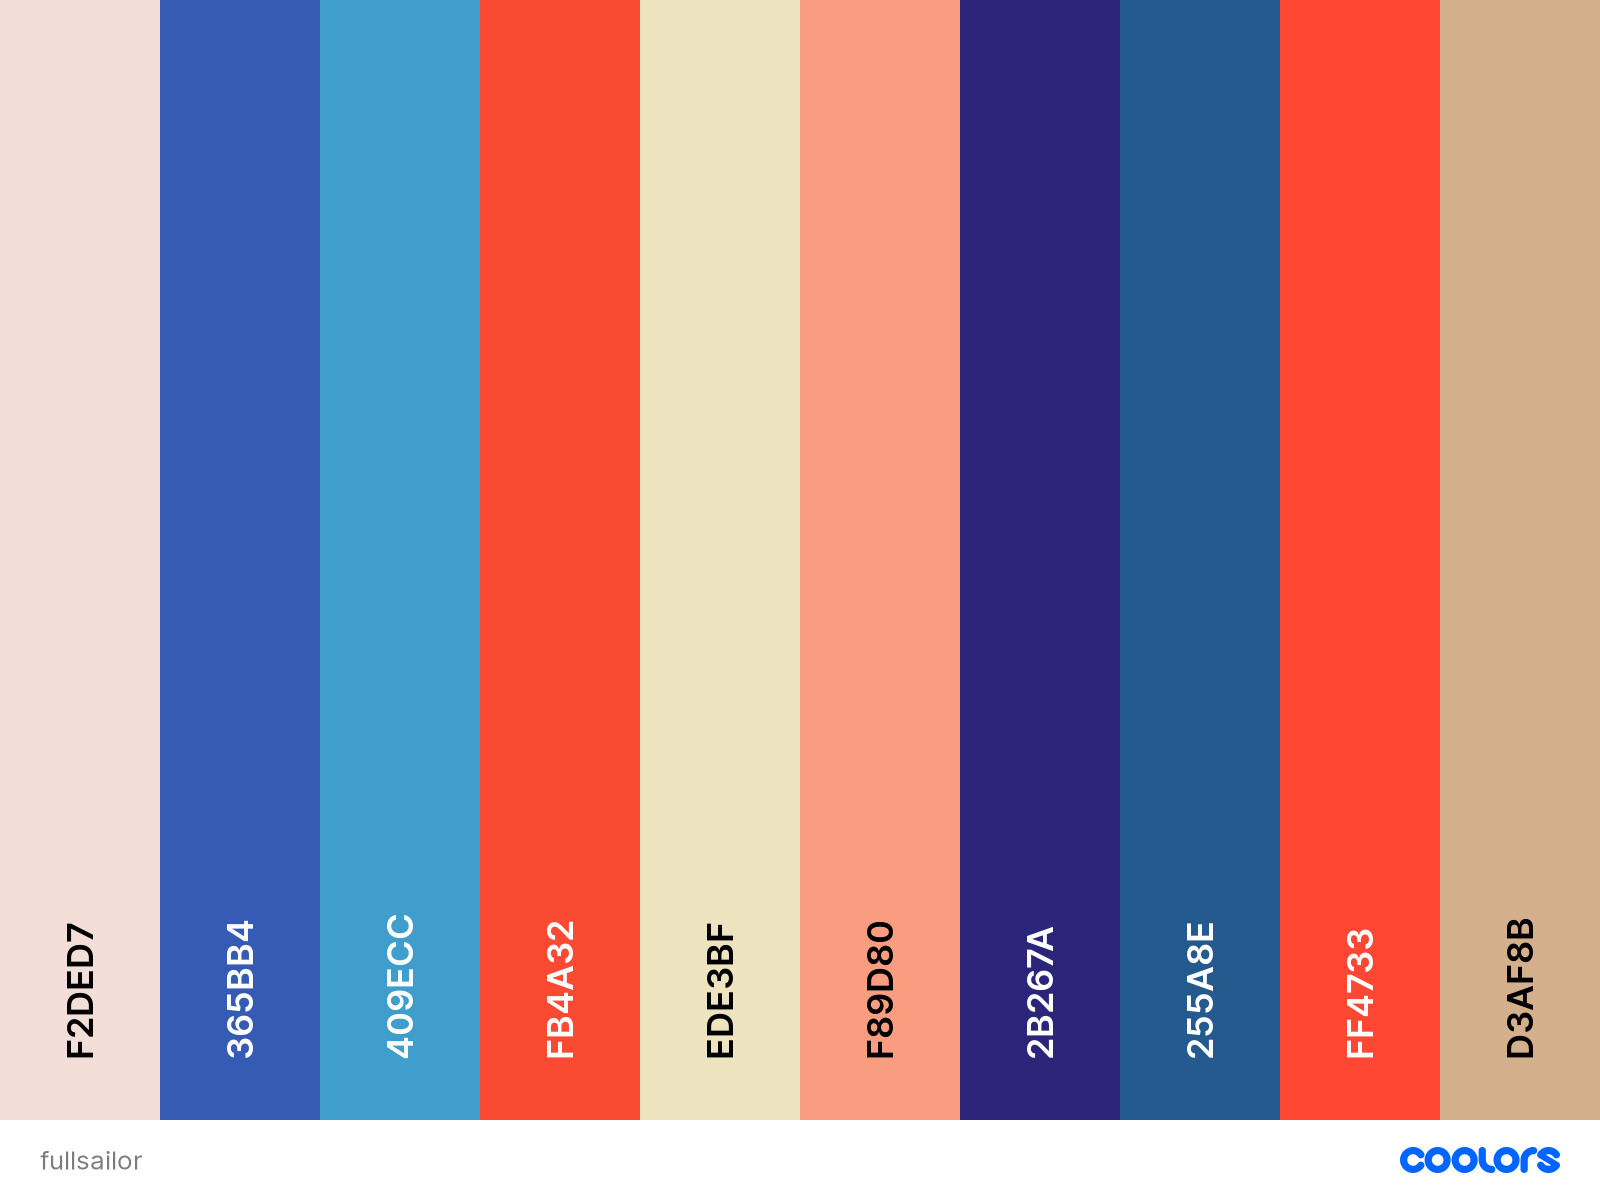 The color palette derived from the original screenshot, made in Coolors. 